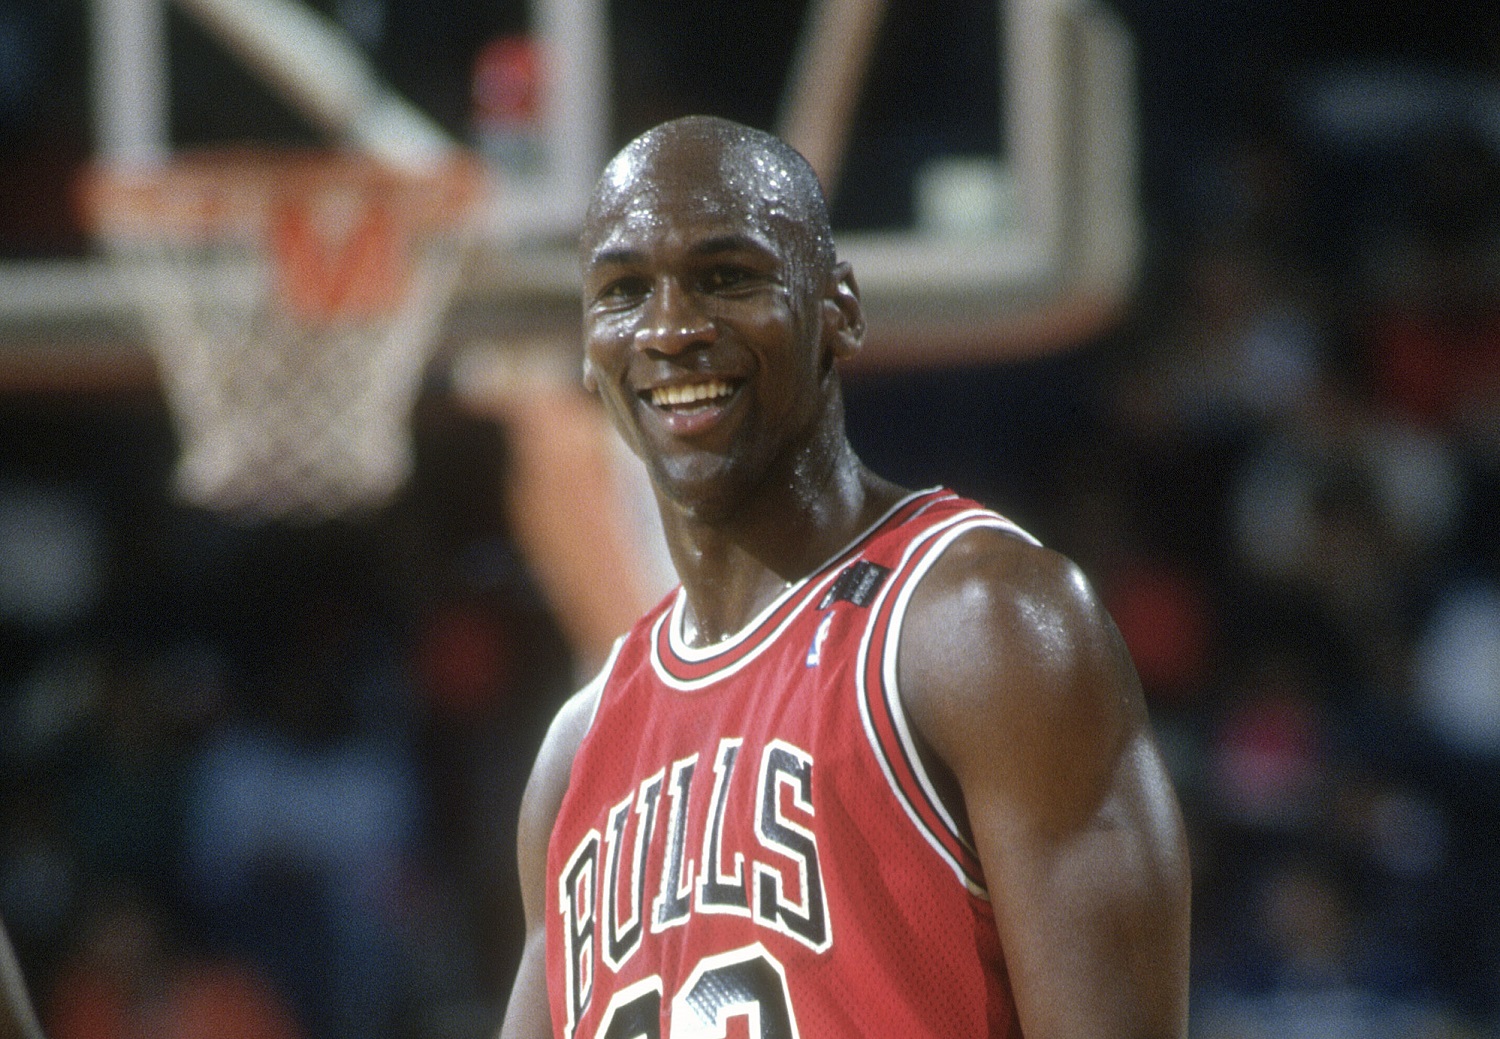 Michael Jordan of the Chicago Bulls looks on against the Washington Bullets during an NBA basketball game circa 1992 at the Capital Centre in Landover, Maryland.